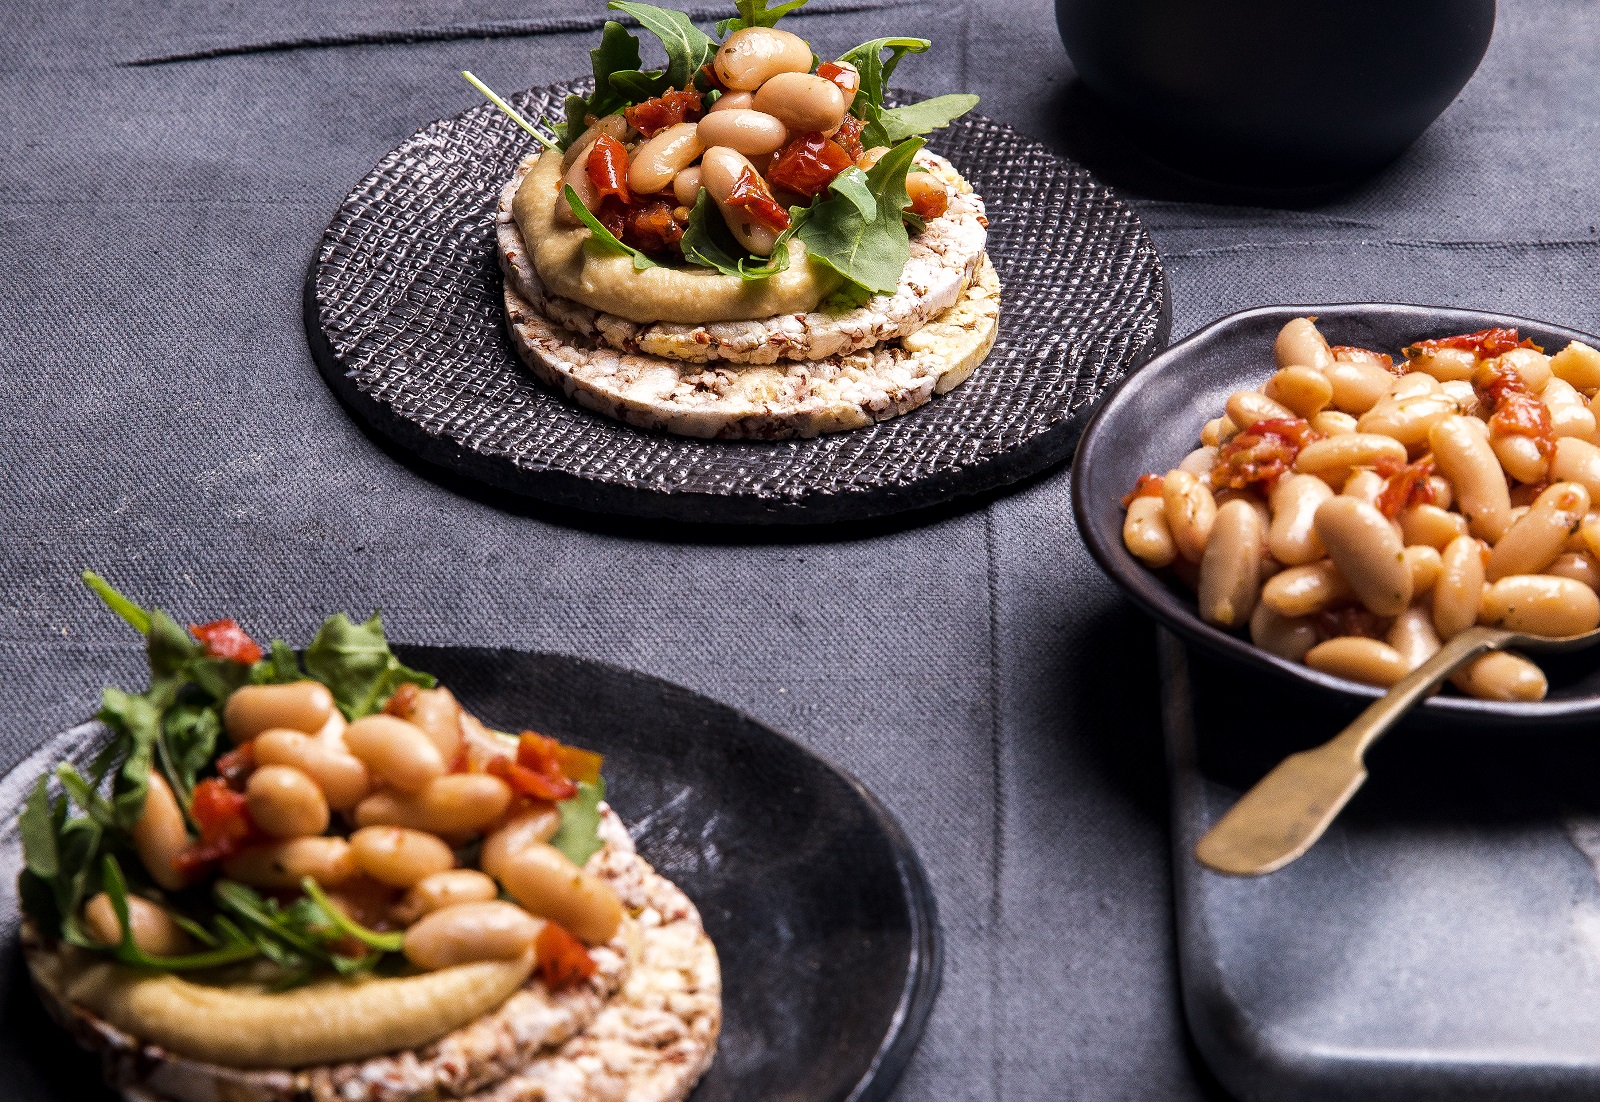 Hommus, Rocket, White Beans & Sundried Tomatoes on CORN THINS slices